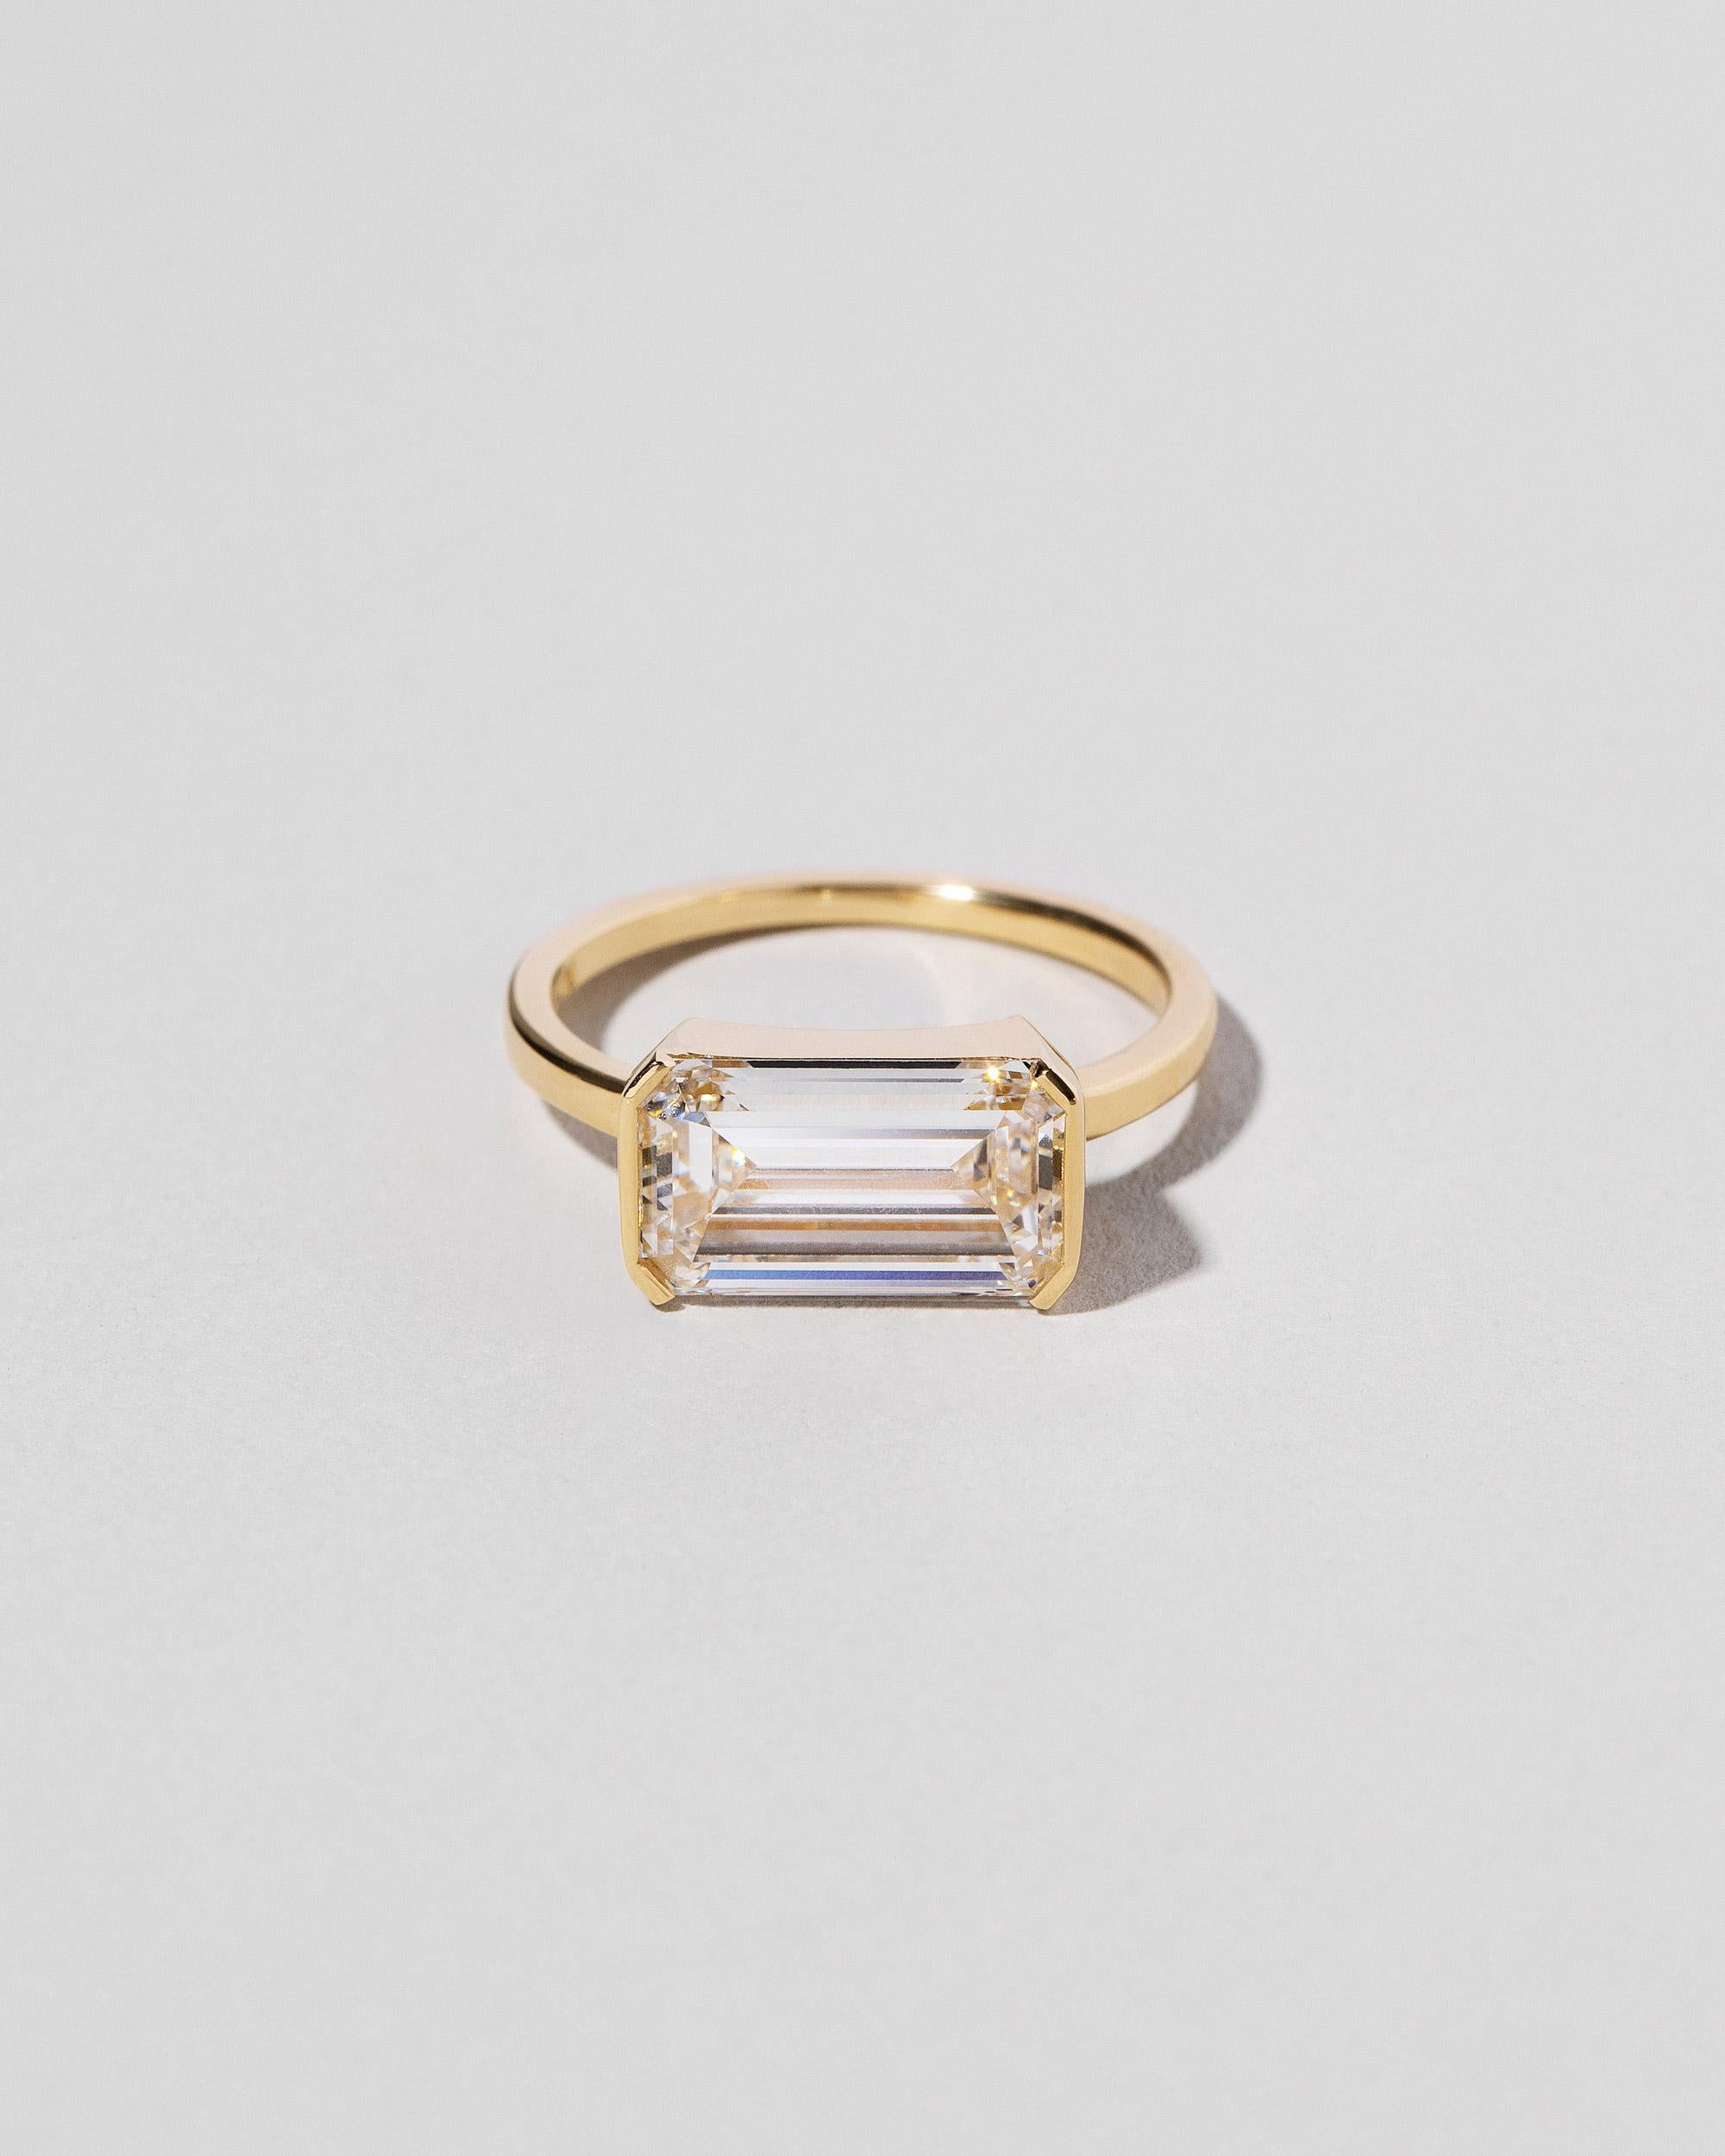 One-of-a-kind solitaire 
Emerald cut diamond (G/VVS2) weighs 3.16 ct.
Stone is secured in a modified bezel setting
Square wire band measures 1.7mm
Set in 18k yellow gold

All of our pieces are made by hand in NYC. Please allow two weeks for resizing.